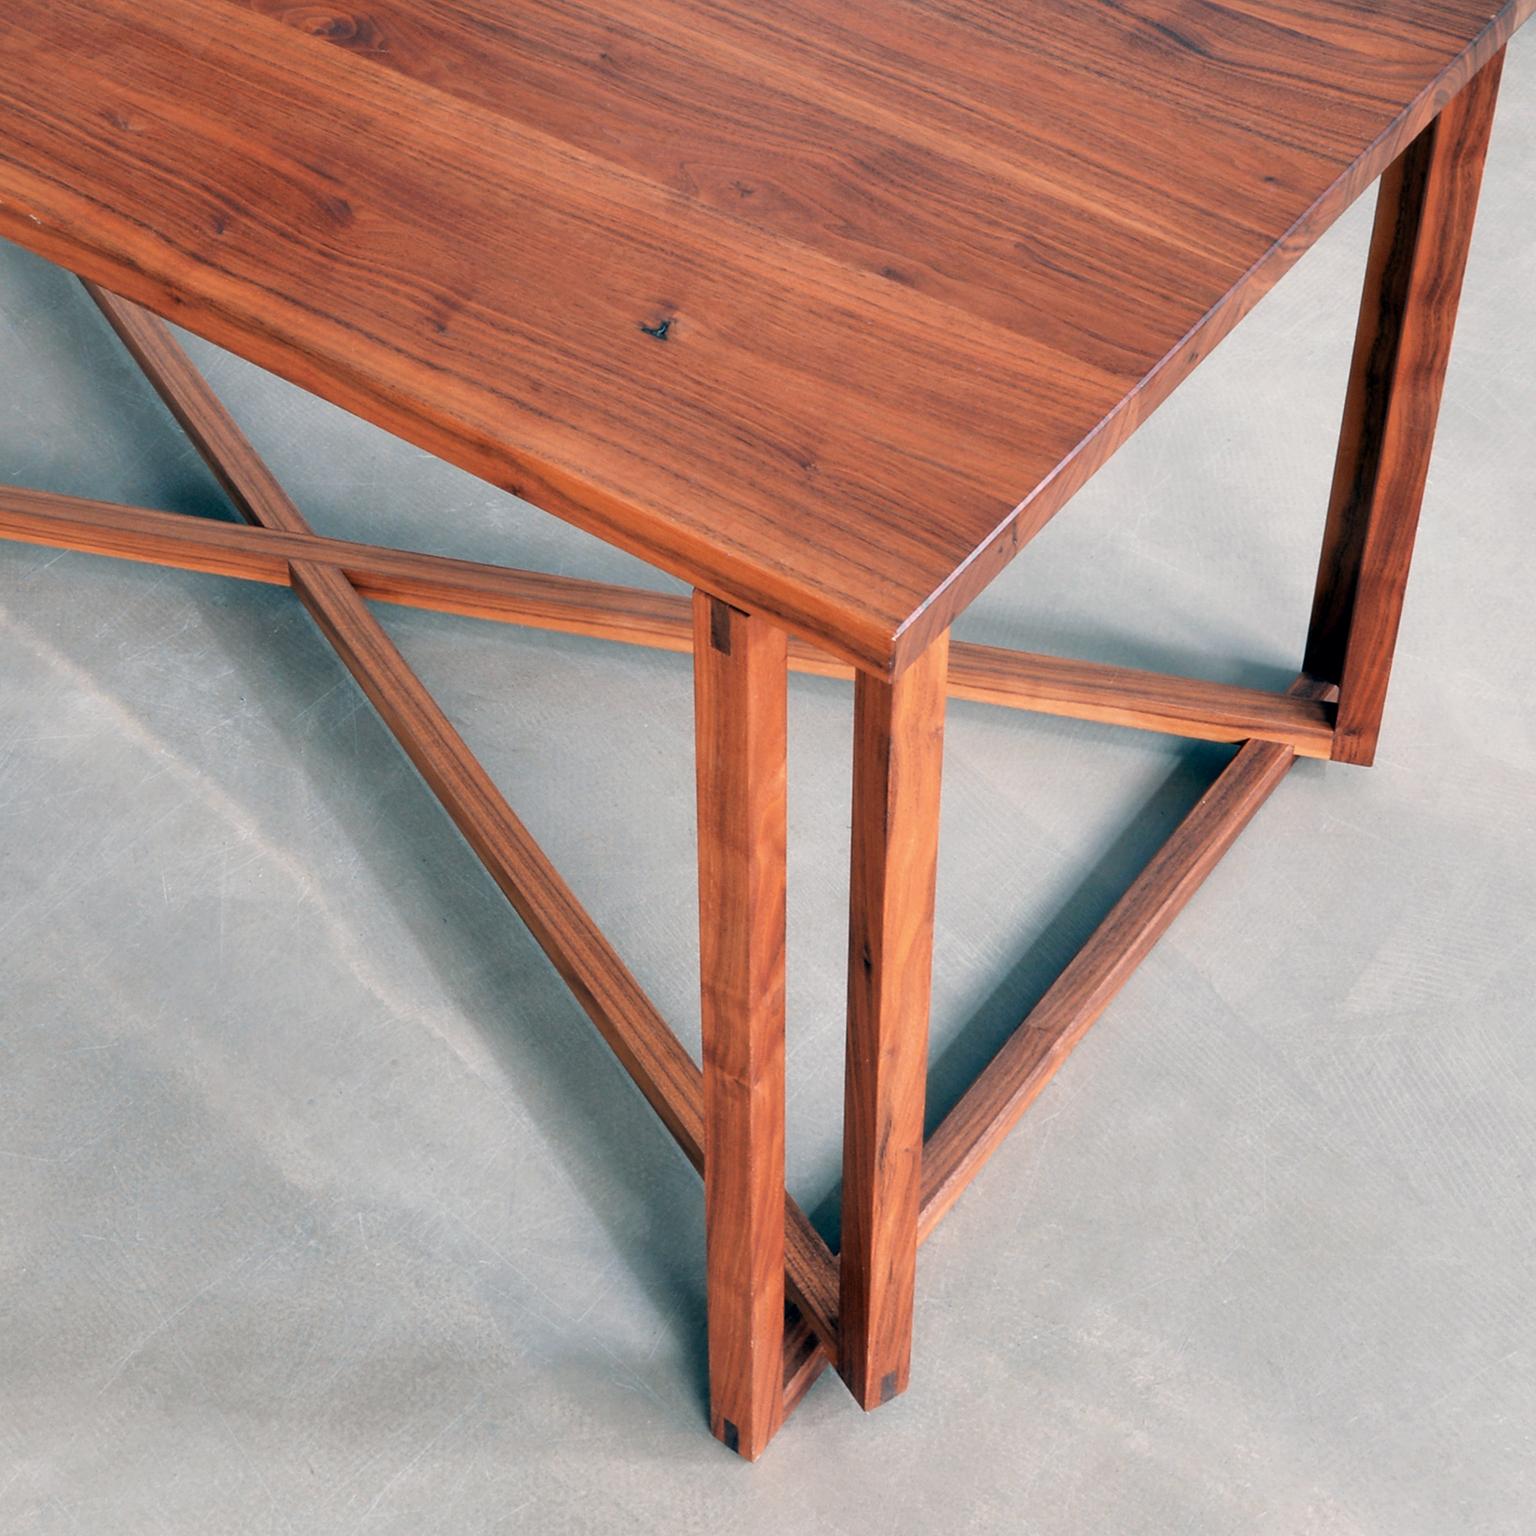 Contemporary Unique Hand Crafted Table in Solid Walnut Wood by Laura Maasry, Berlin, 2020 For Sale